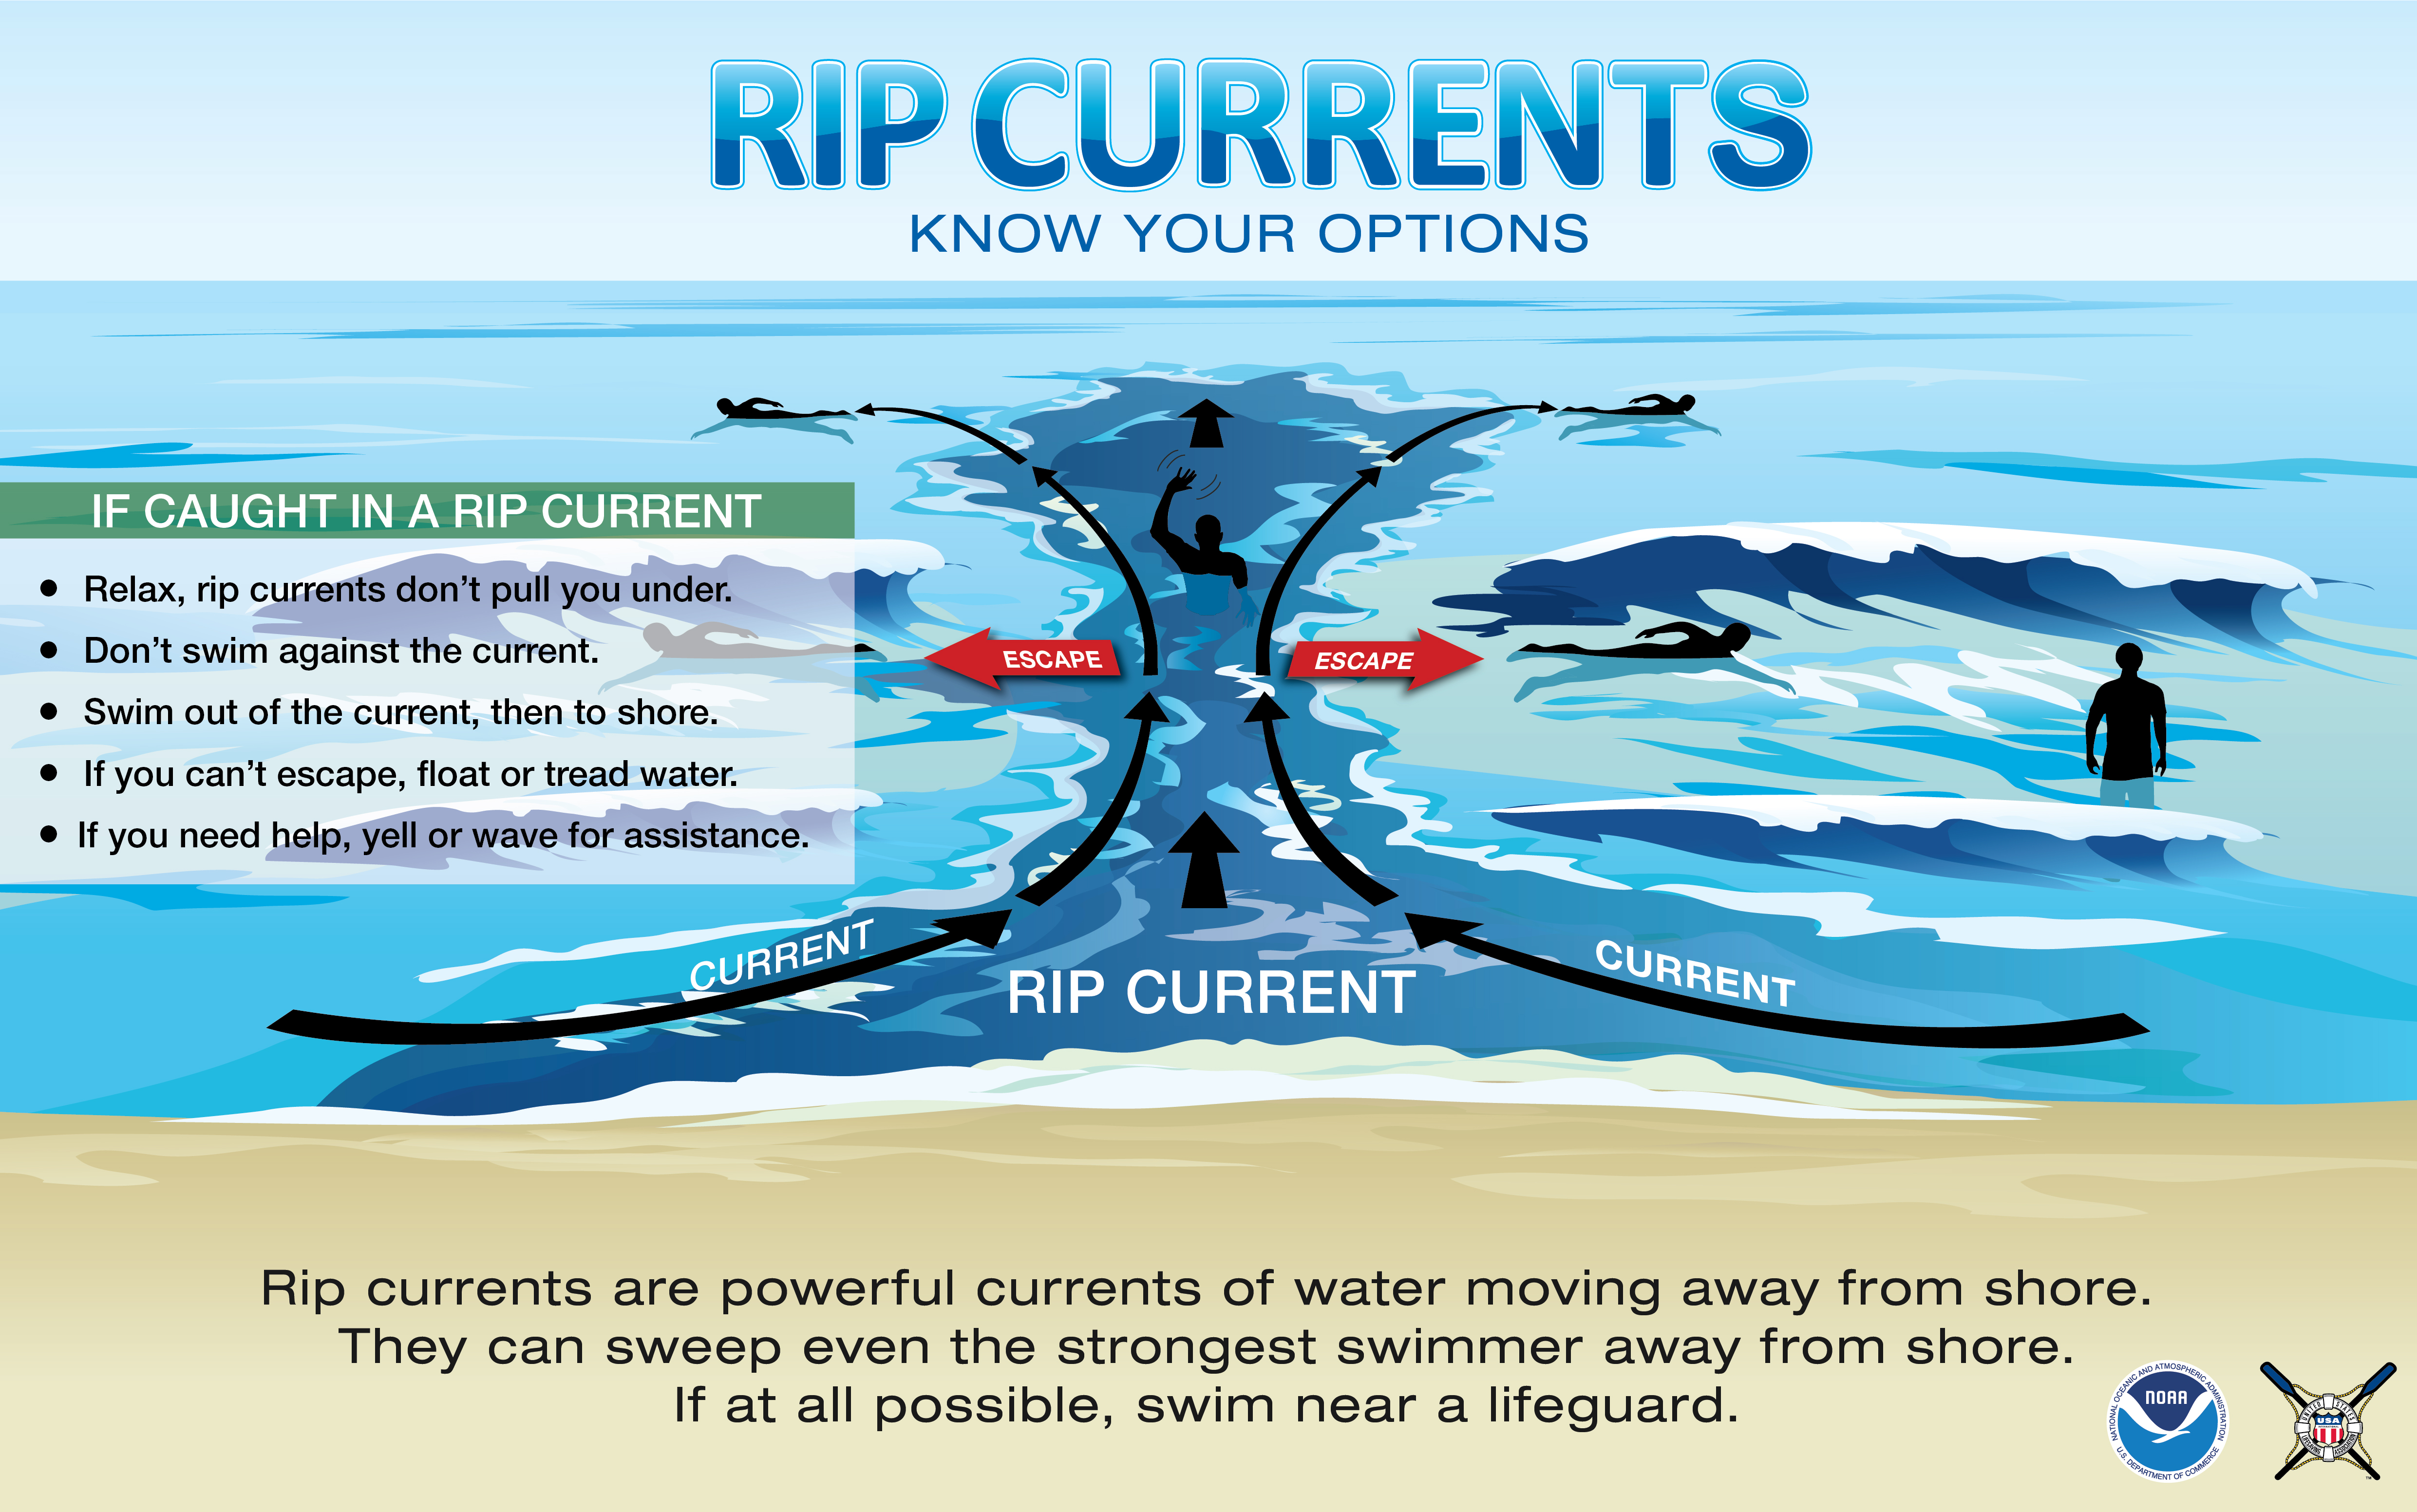 Rip Currents: Know Your Options. If caught in a rip current: 1) Relax, rip currents don't pull you under. 2) Don't swim against the current. 3) Swim out of the current, then to shore. 4) If you can't escape, float or tread water. 5) If you need help, yell or wave for assistance. Rip currents are powerful currents of water moving away from shore. They can sweep even the strongest swimmer away from shore. If at all possible, swim near a lifeguard.